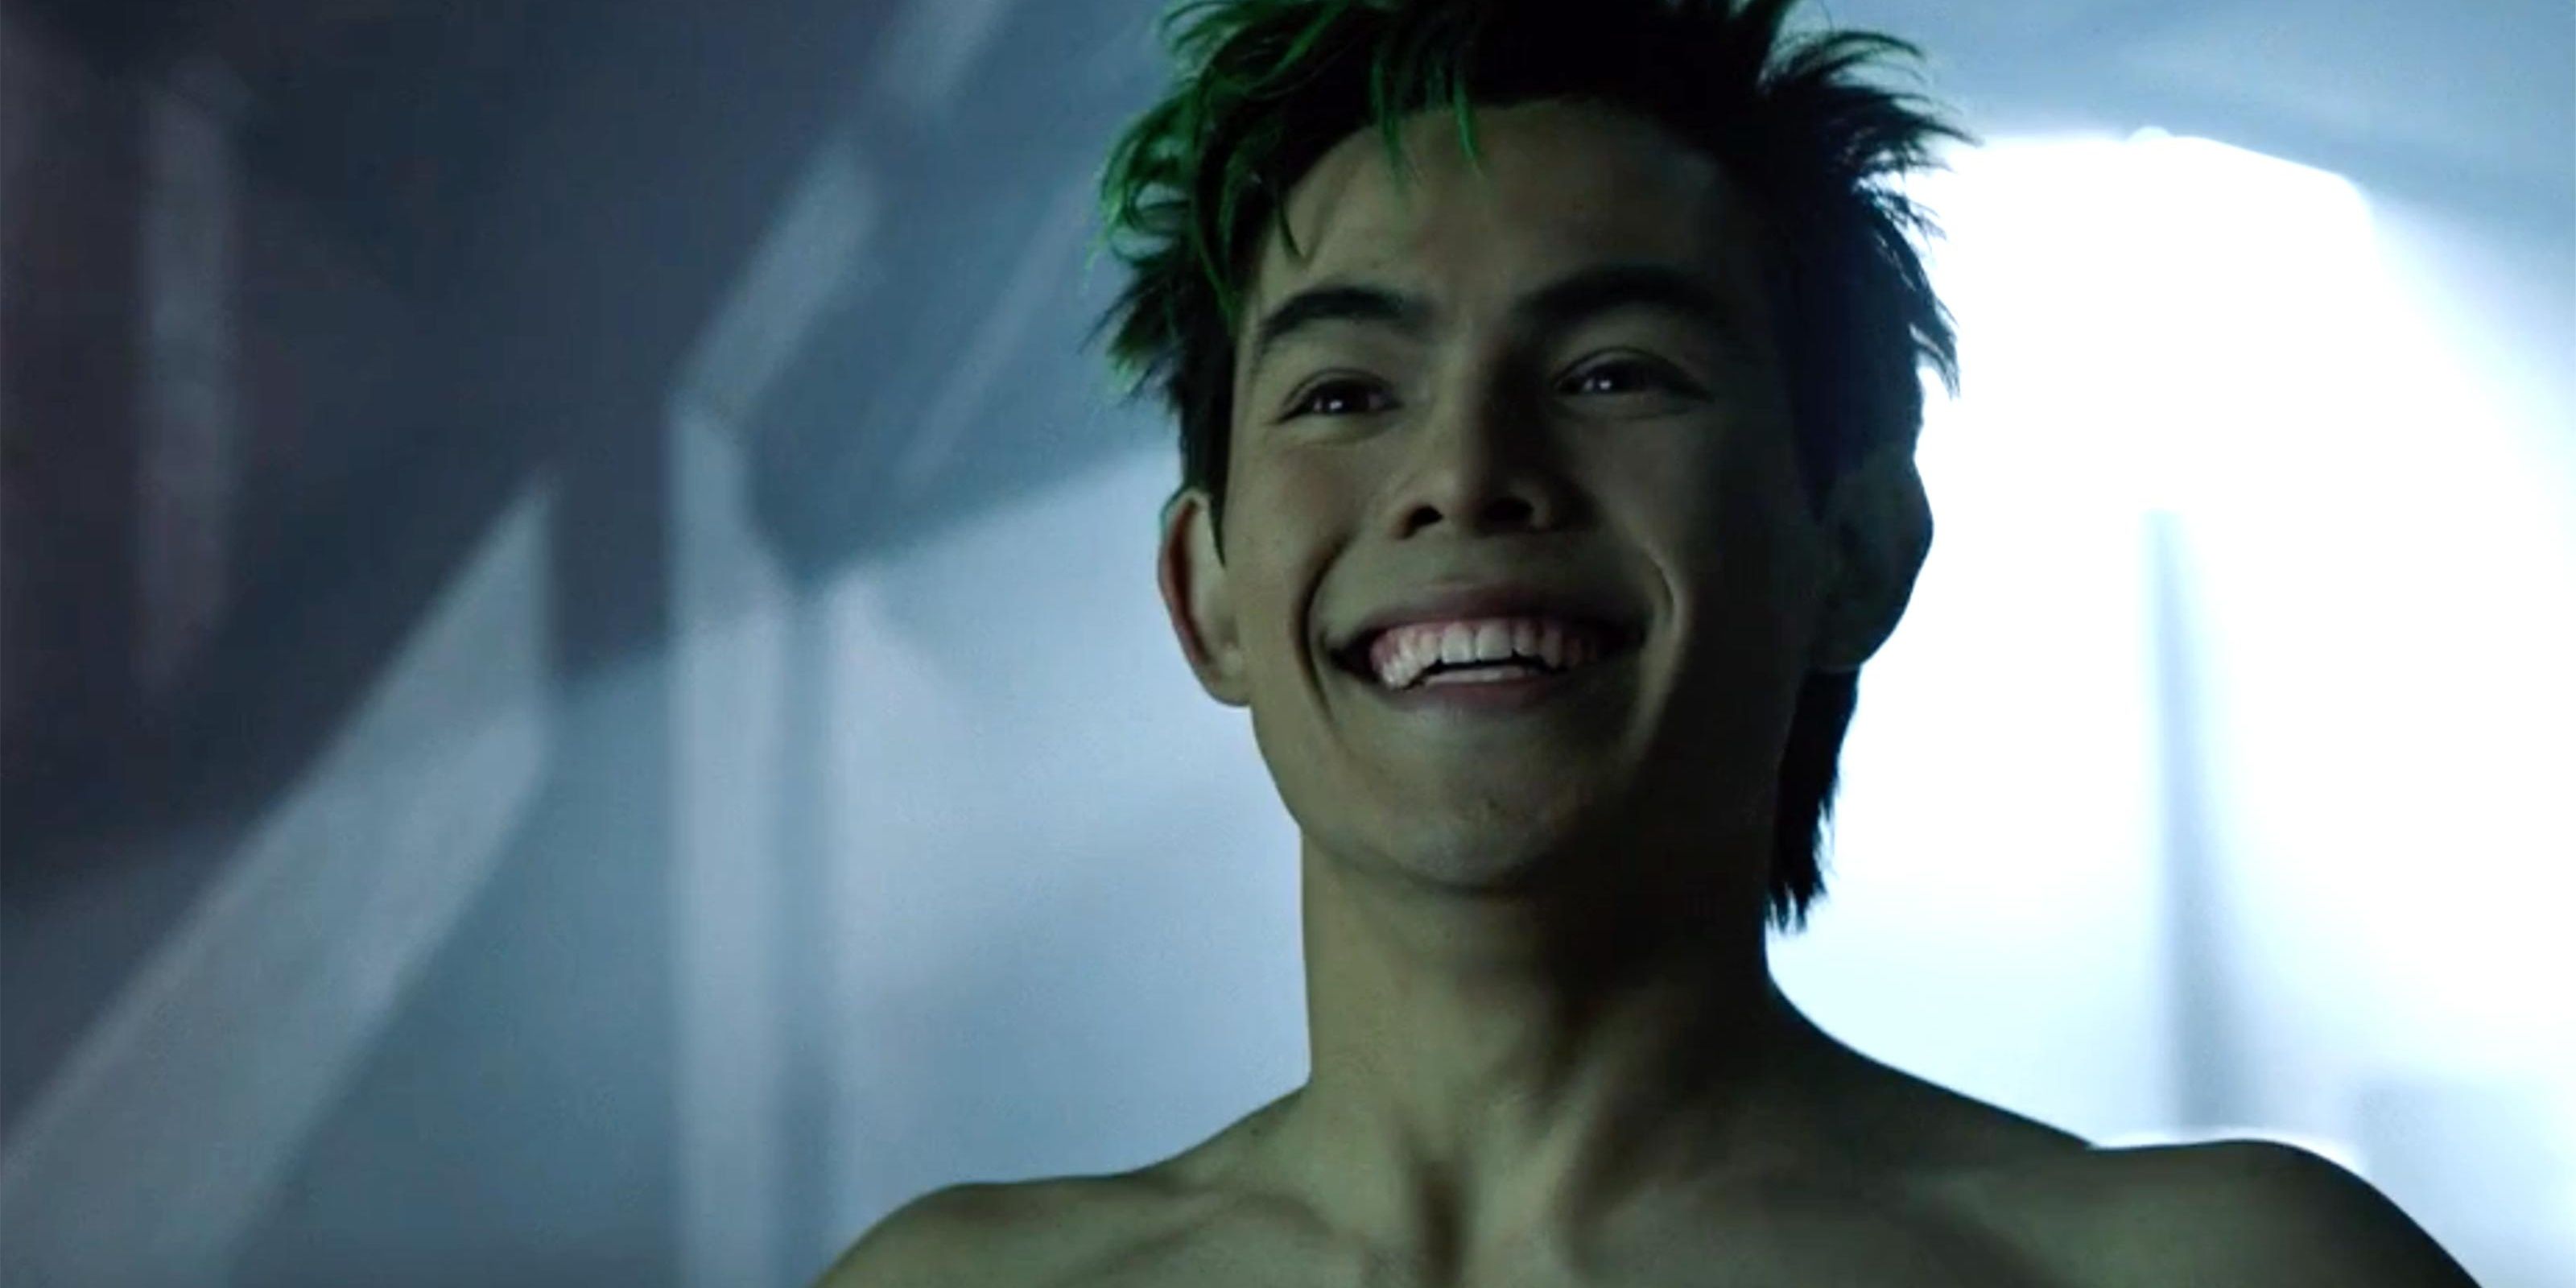 Gar smiling in the first season of Titans